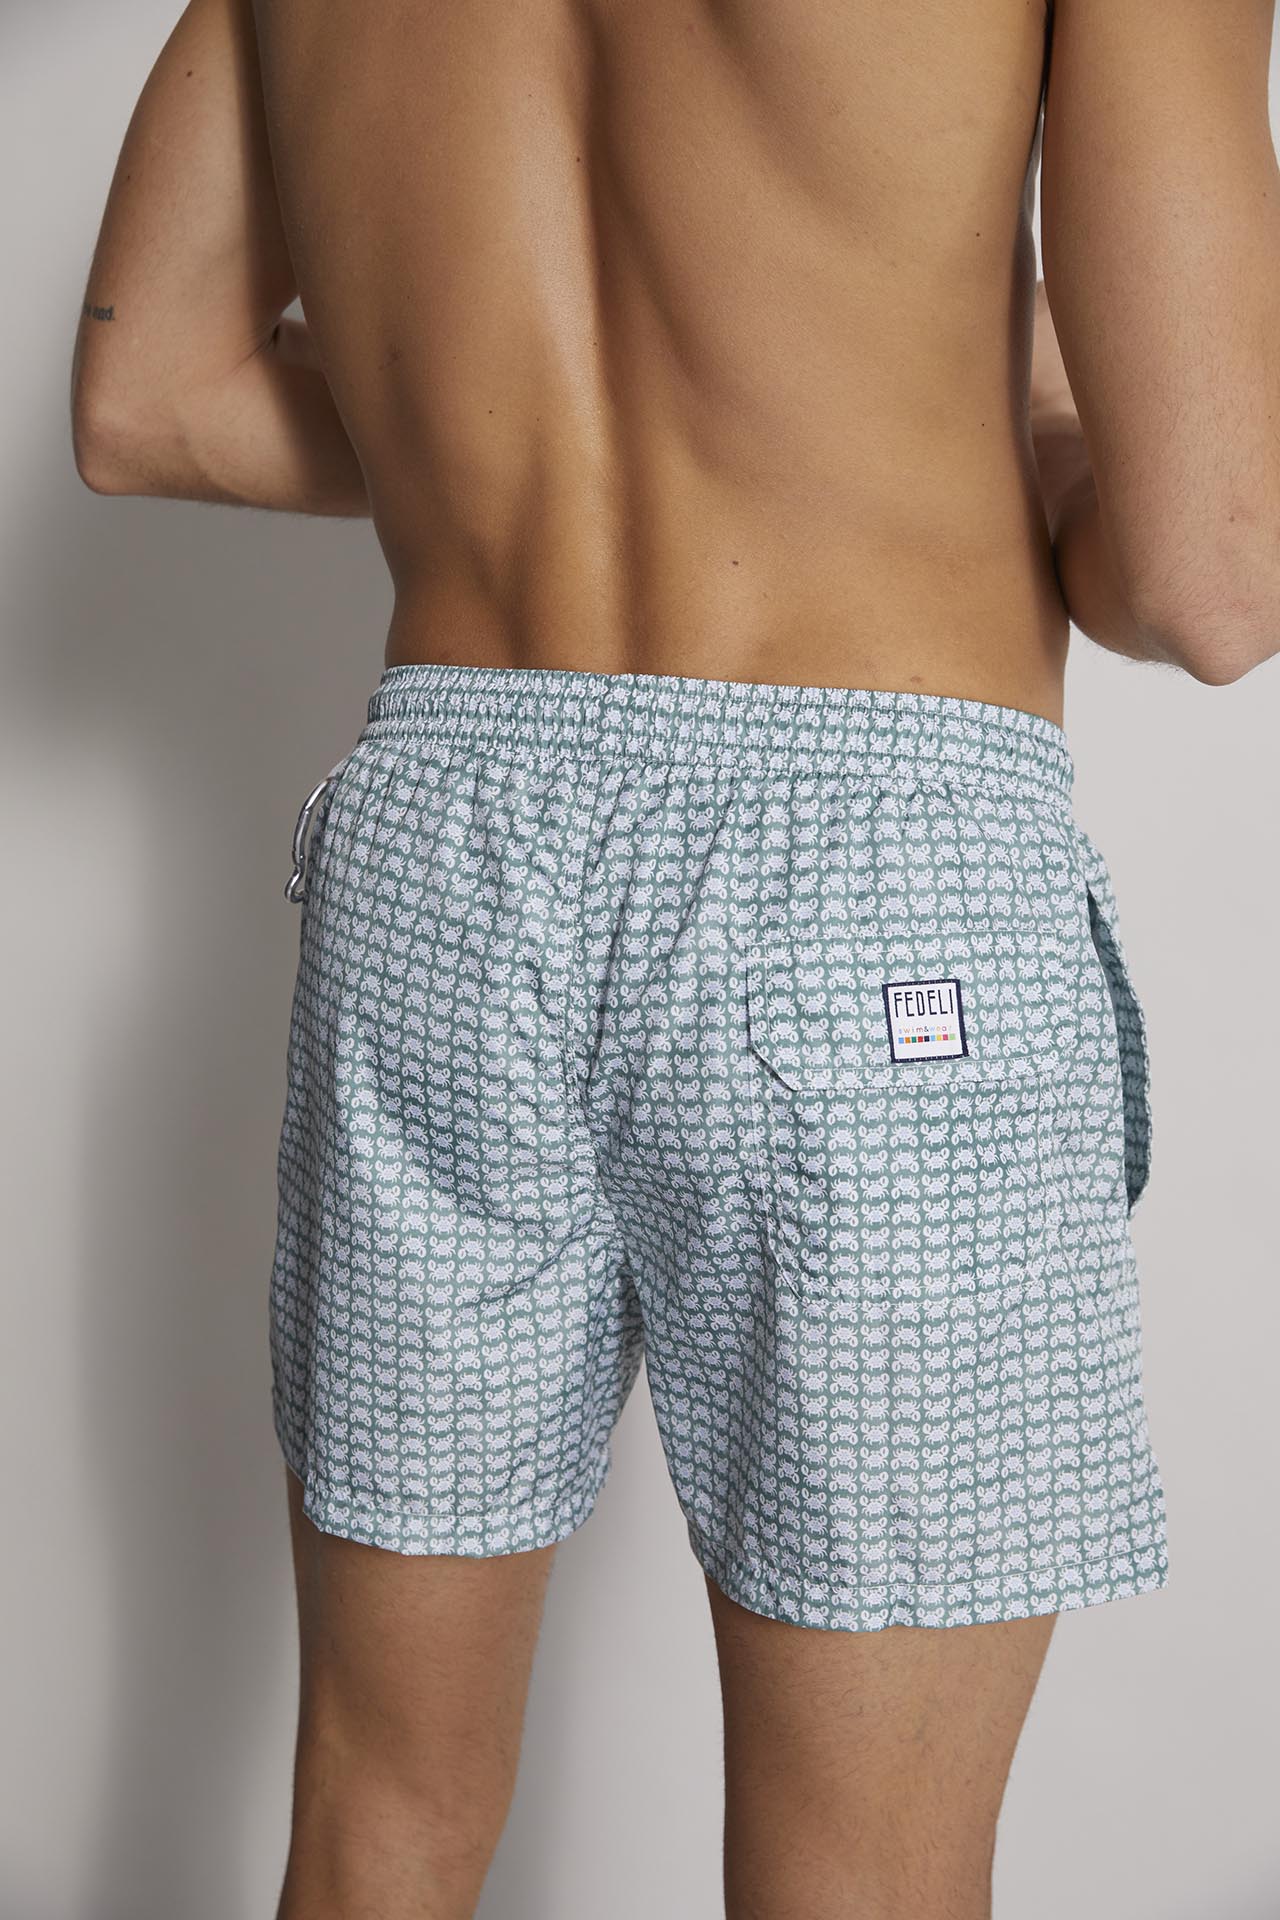 Madeira - the sustainable swim trunk - crab pattern